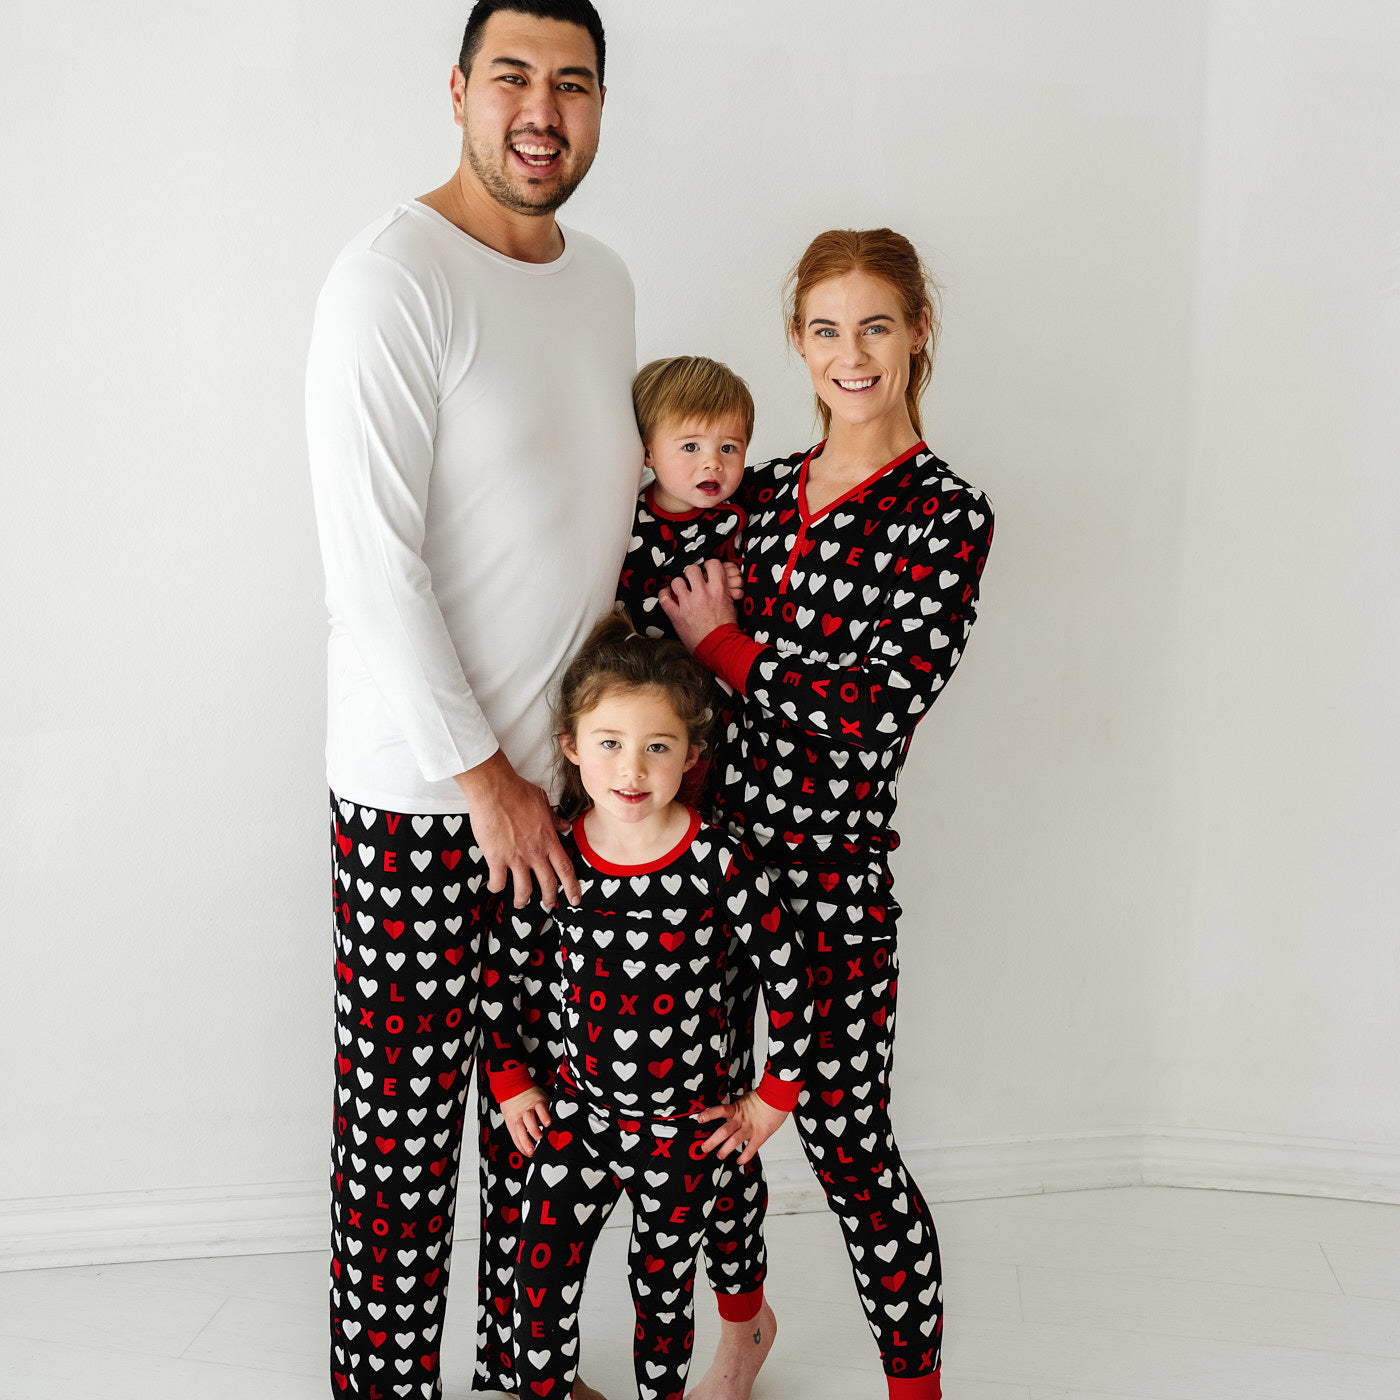 Family of four wearing matching Black XOXO pajama sets. Dad is wearing men's Black XOXO pajama pants paired with a men's solid white pajama top. Mom is wearing Black XOXO women's pajama pants and matching women's pajama top. Kids are wearing Black XOXO pajamas in two piece and zippy styles.